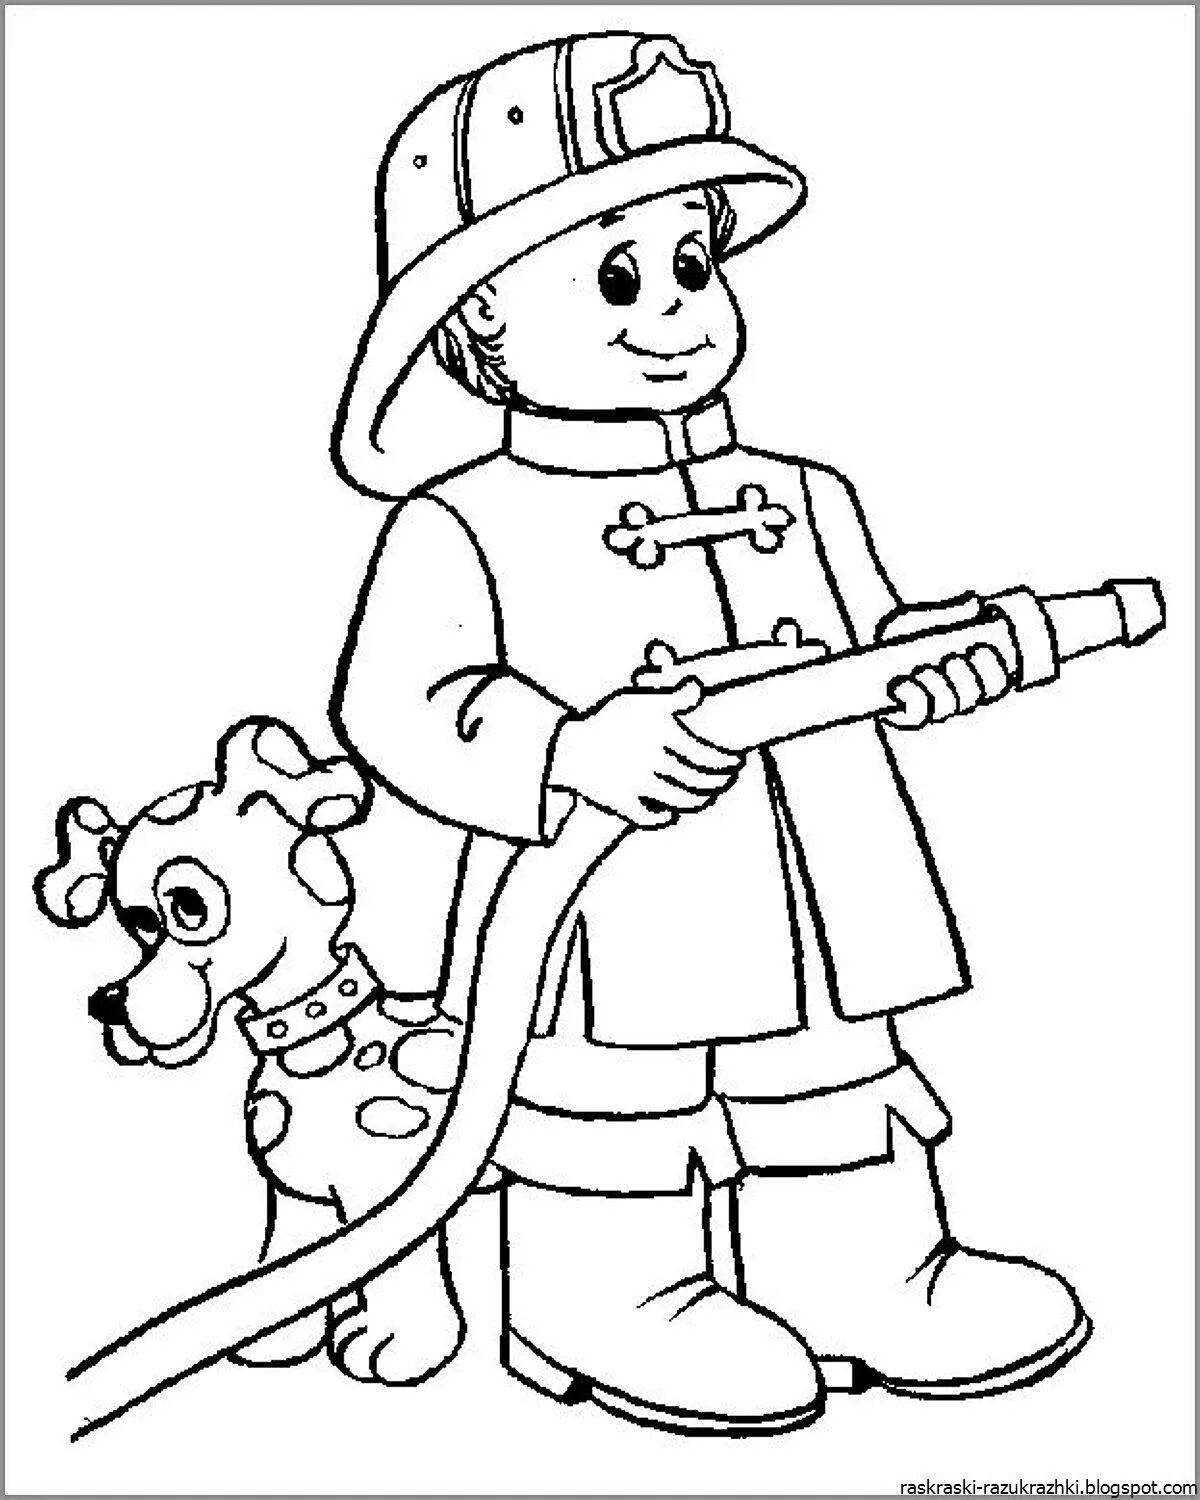 Colorful senior group coloring page